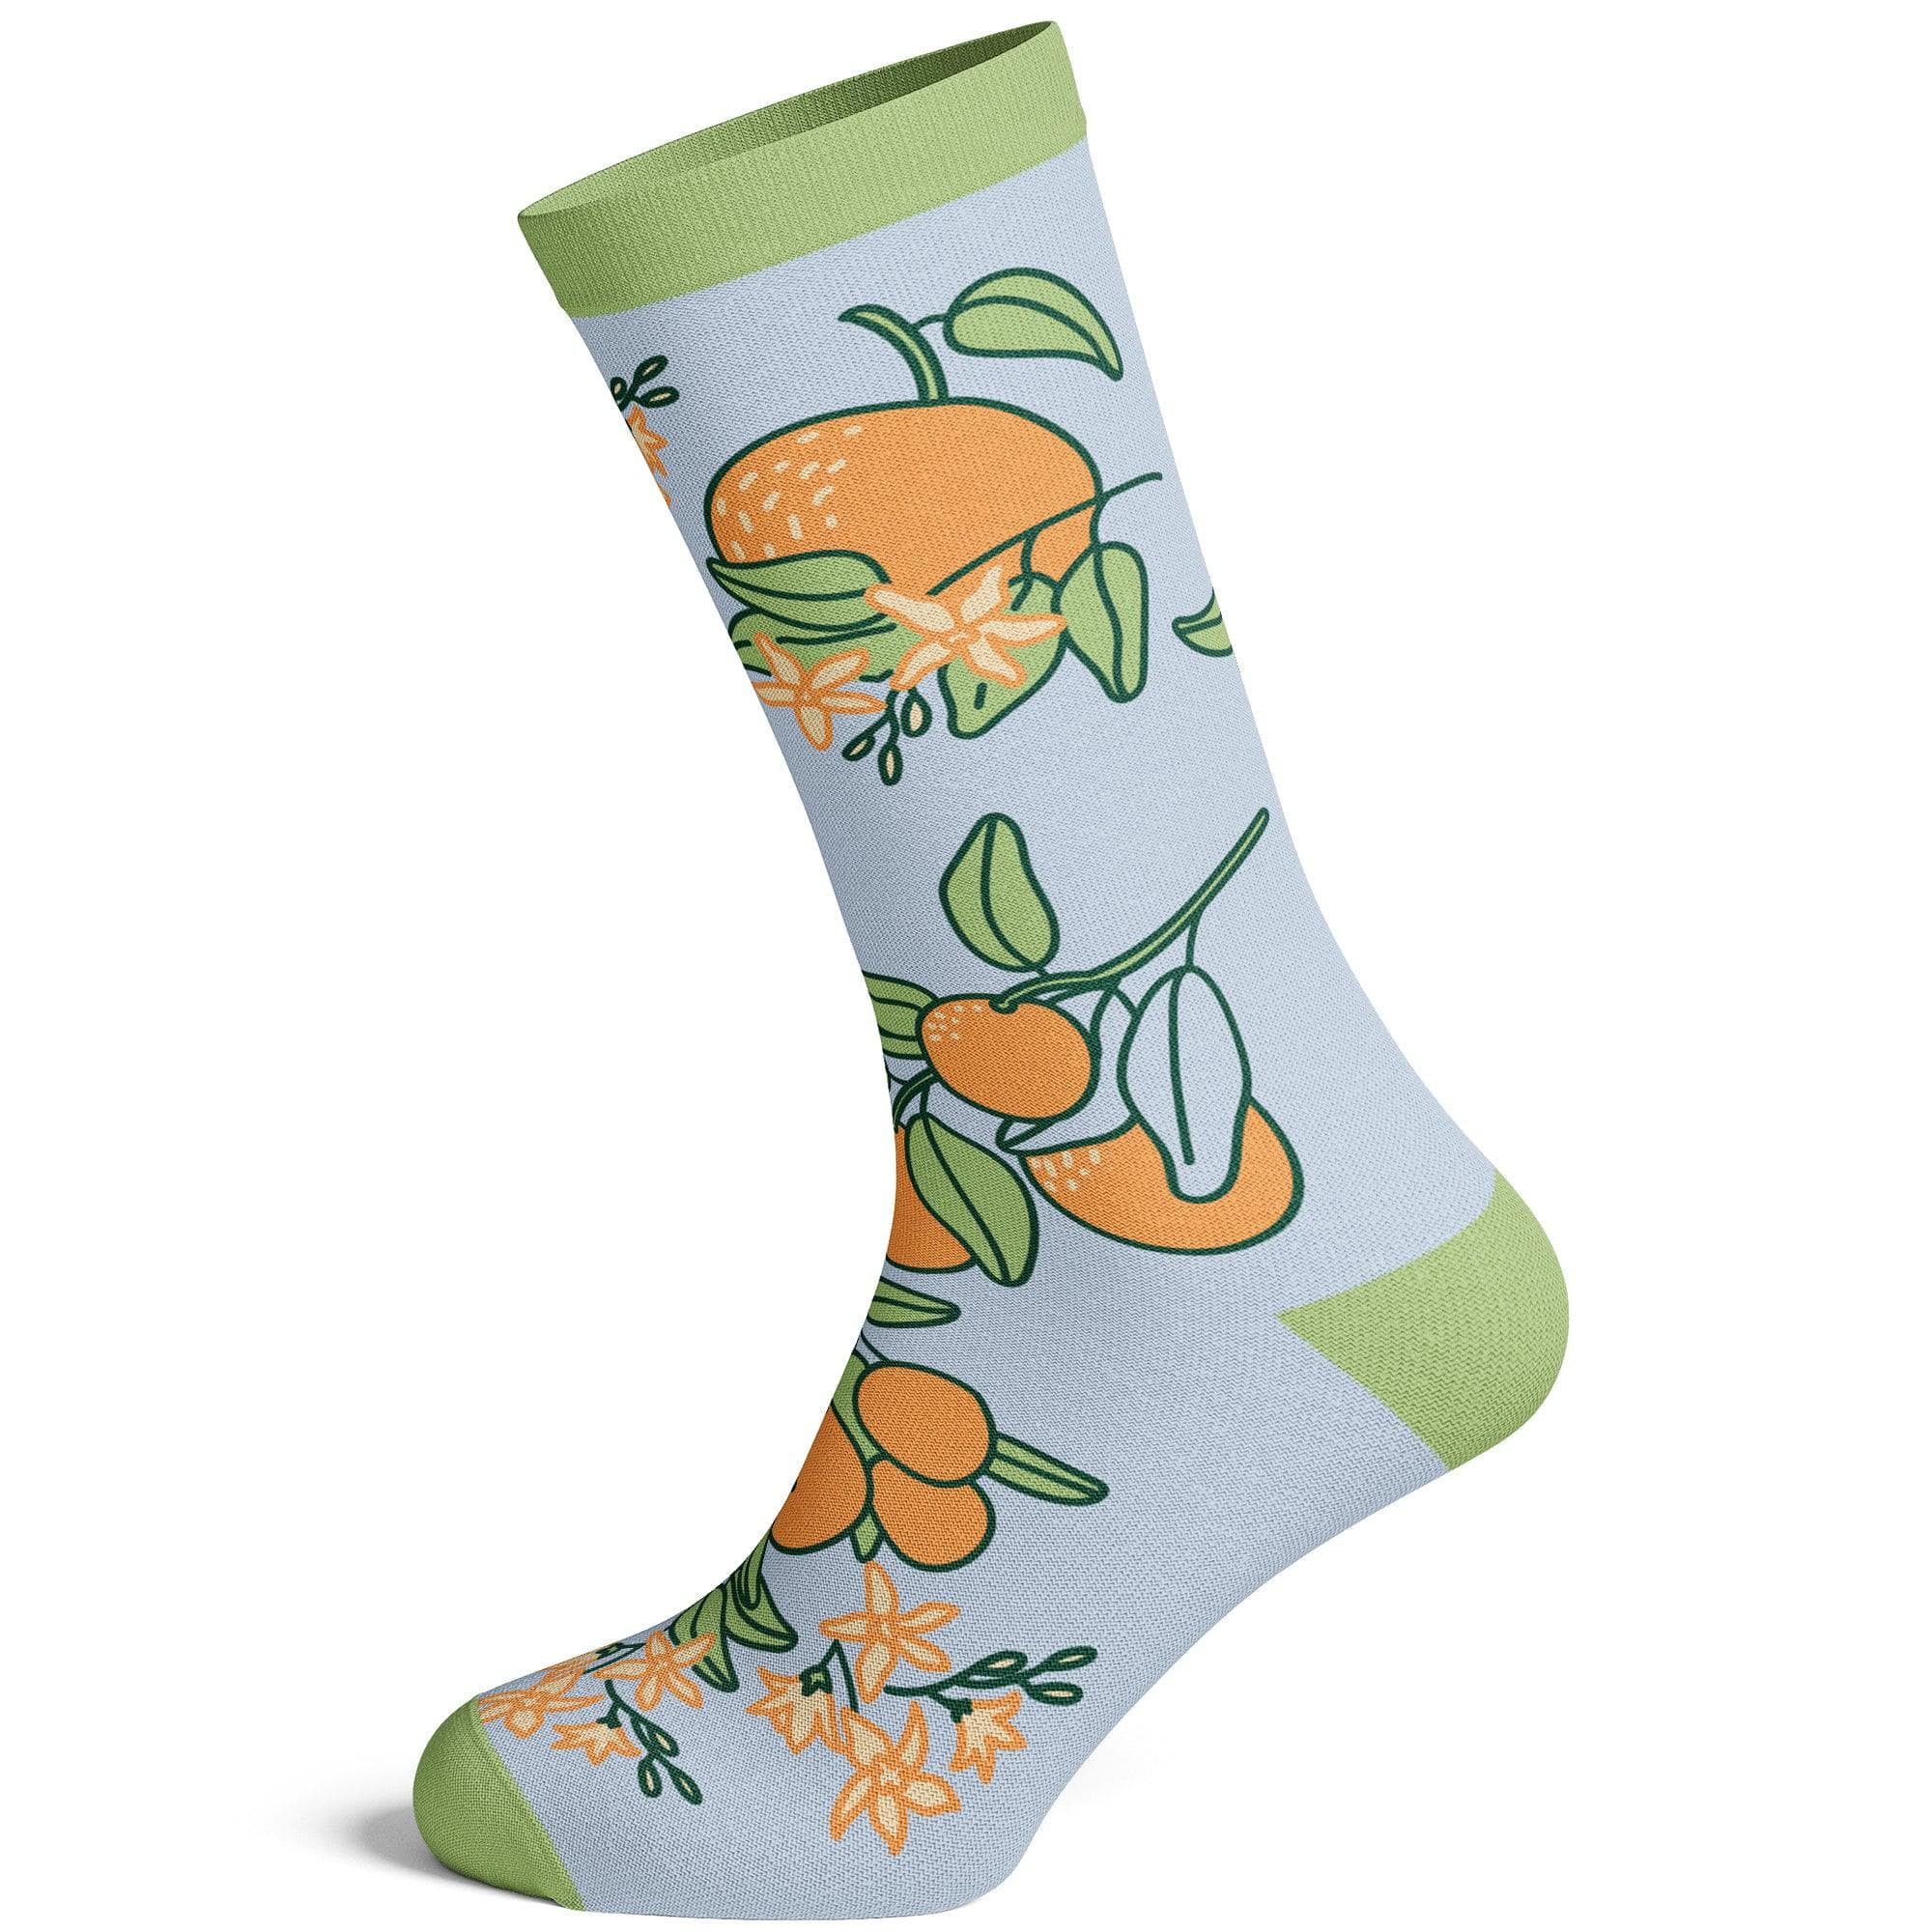 Women's Grow With The Flow Socks  -  Crazy Dog T-Shirts